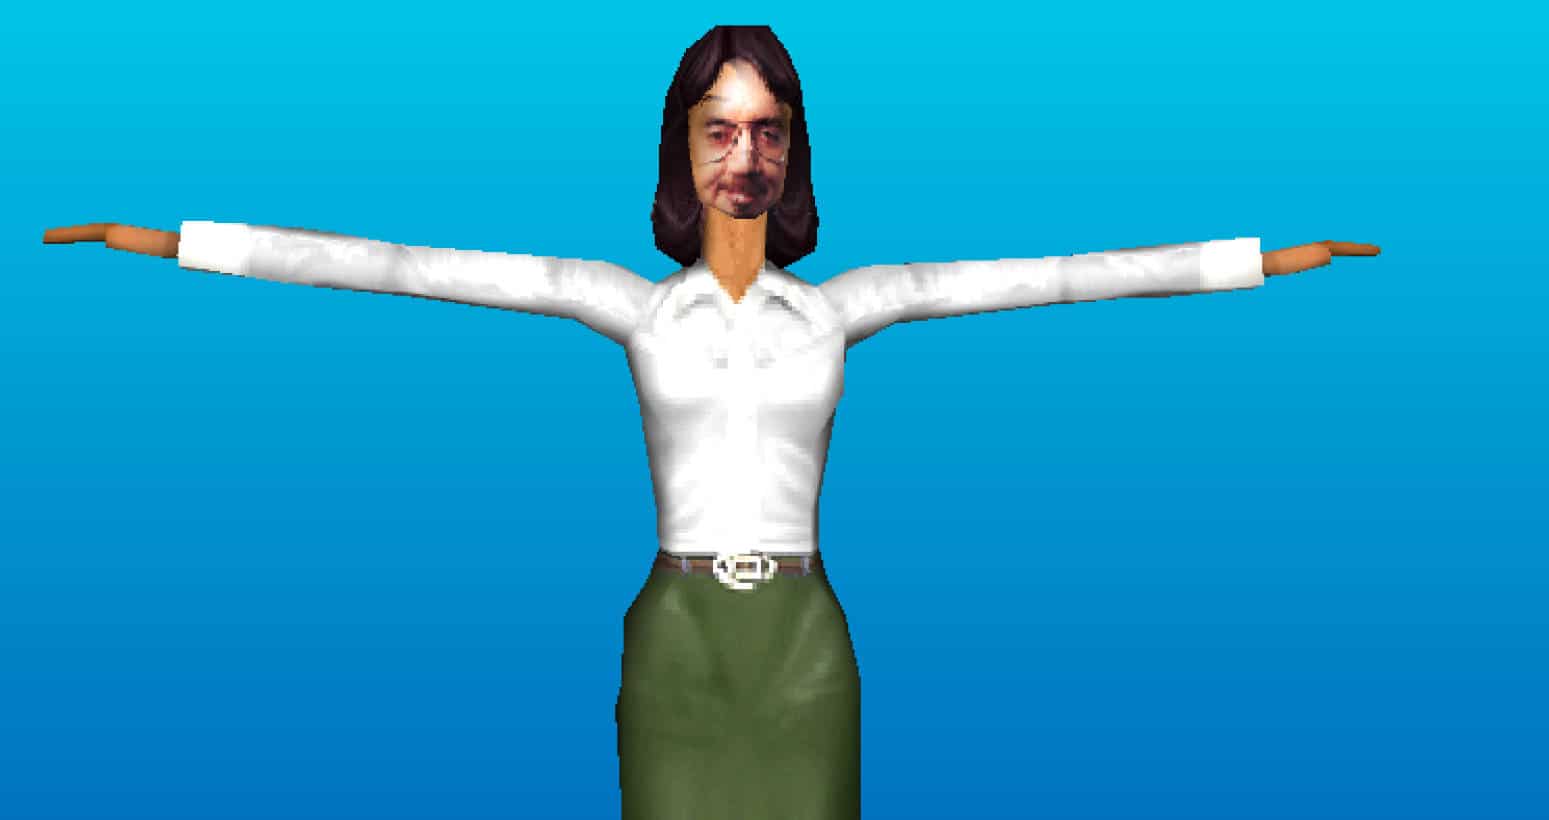 How it started: Custom content in The Sims 1 – Face edition